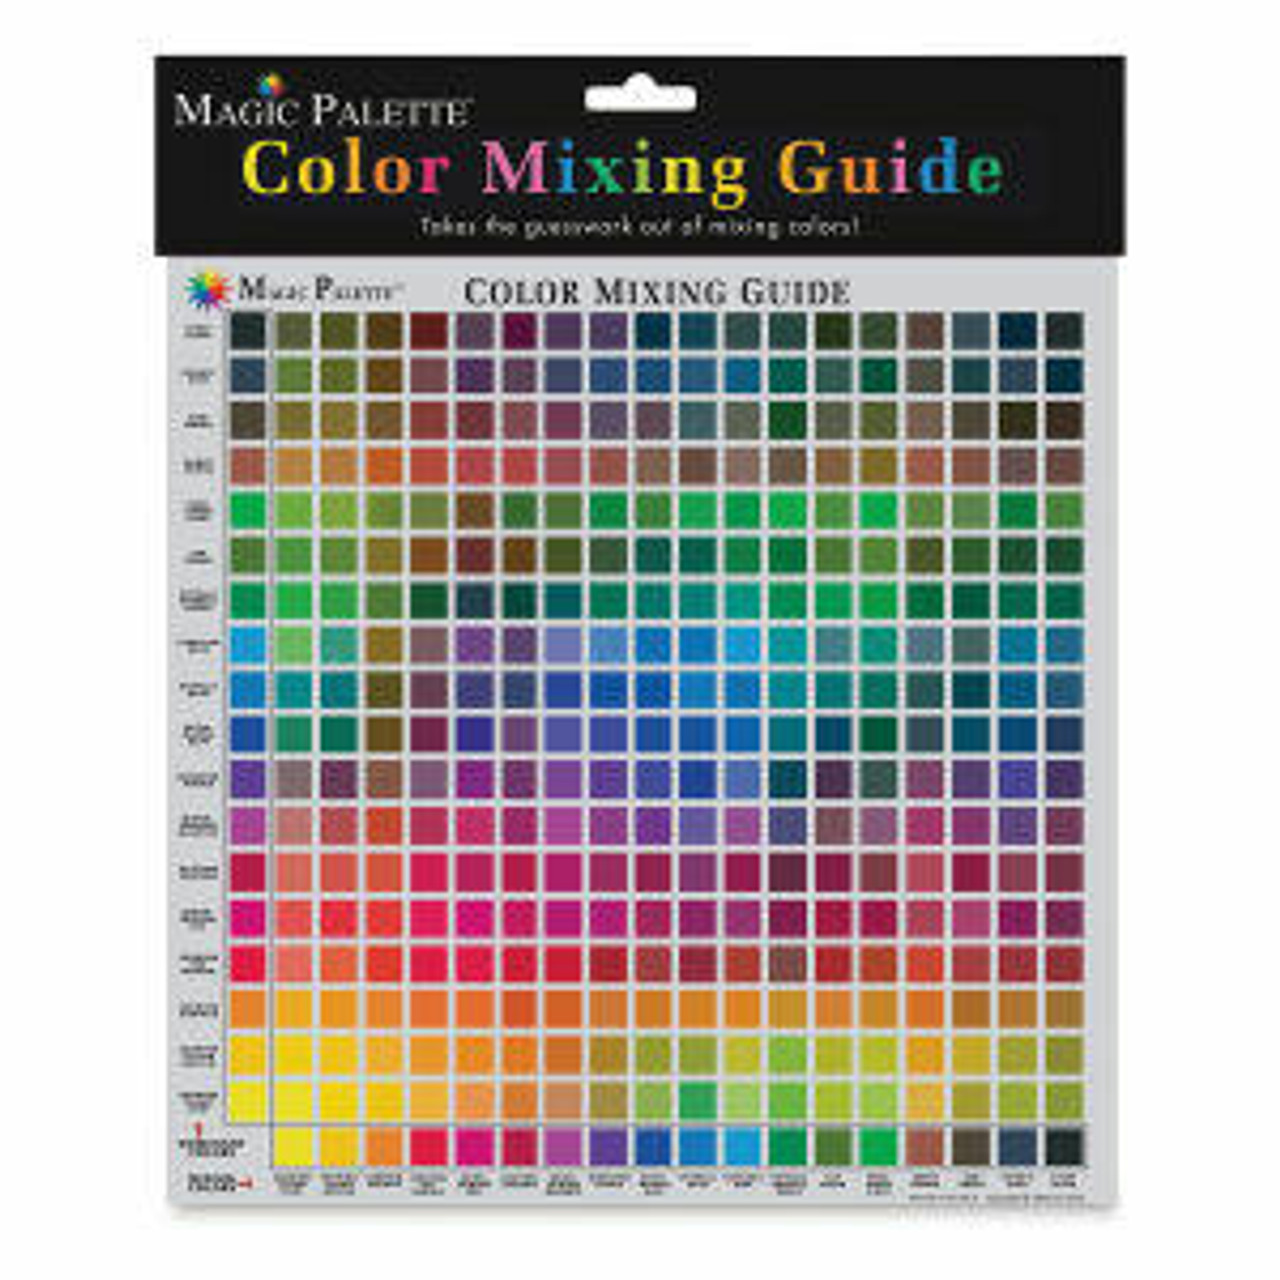 Color Wheel, Color Mix Guide Creative Chromatic Wheel Colour Guide Wheel Tattoo Paint Artist Color Mixing Chart Palette, Color Mixing Pocket Guide